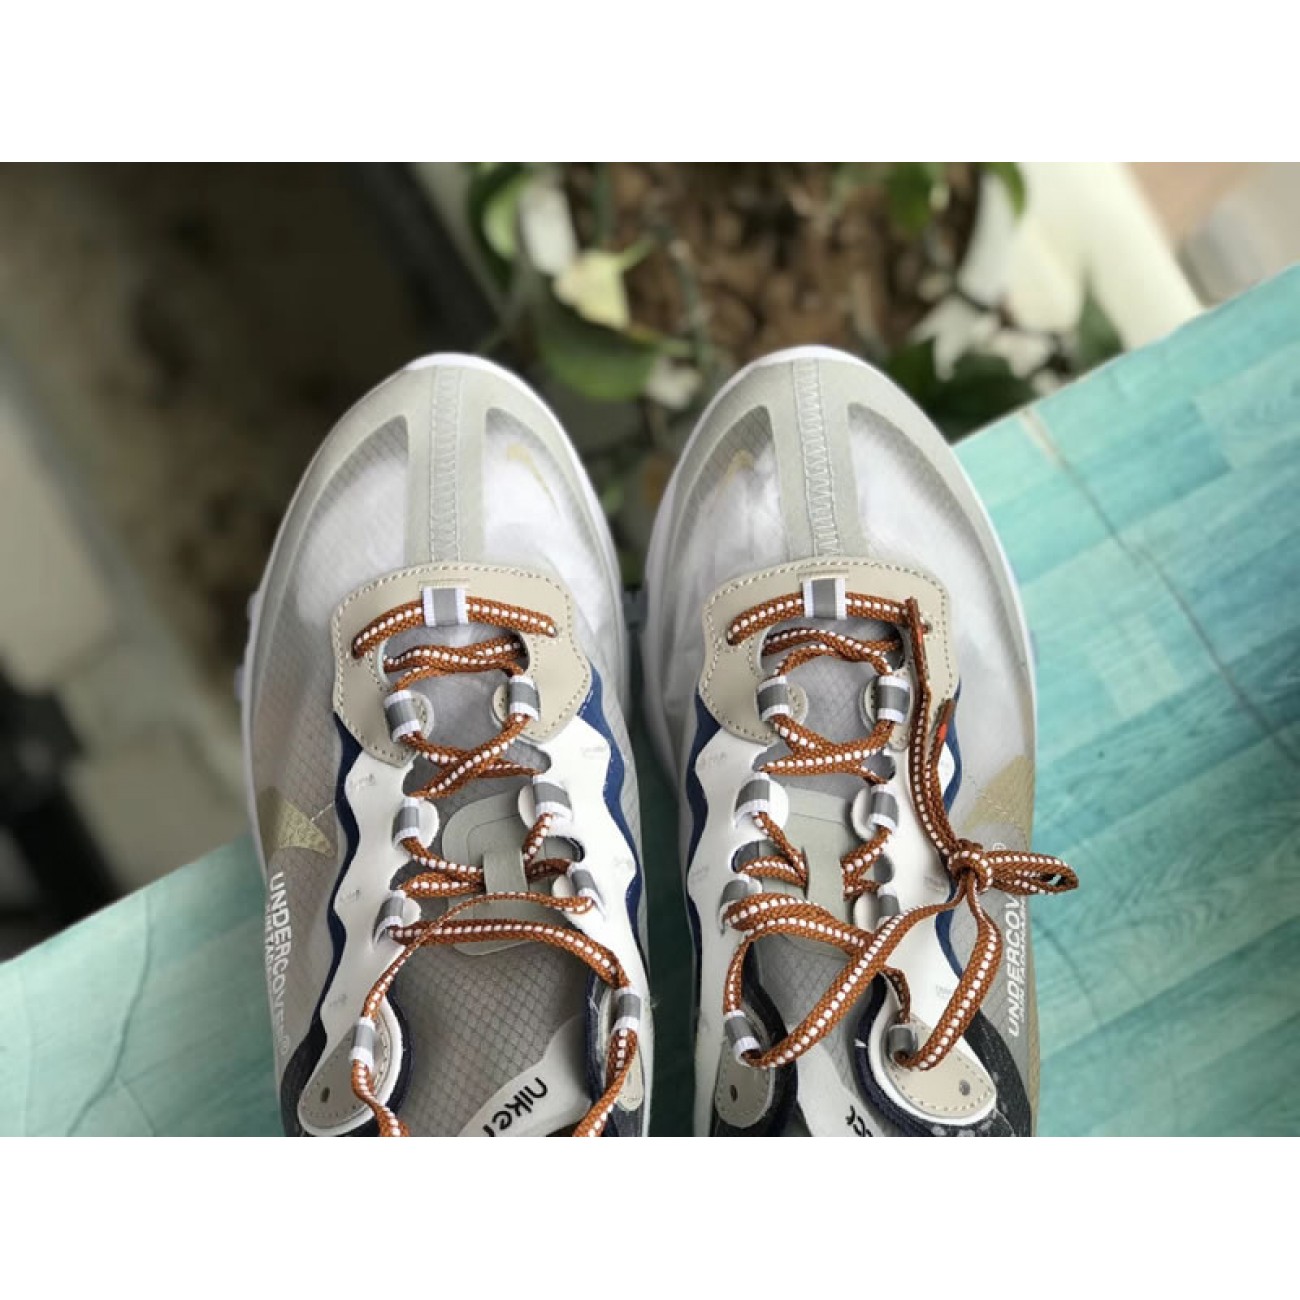 Undercover x Nike Epic React Element 87 Army Green/Navy-White AQ1813-341